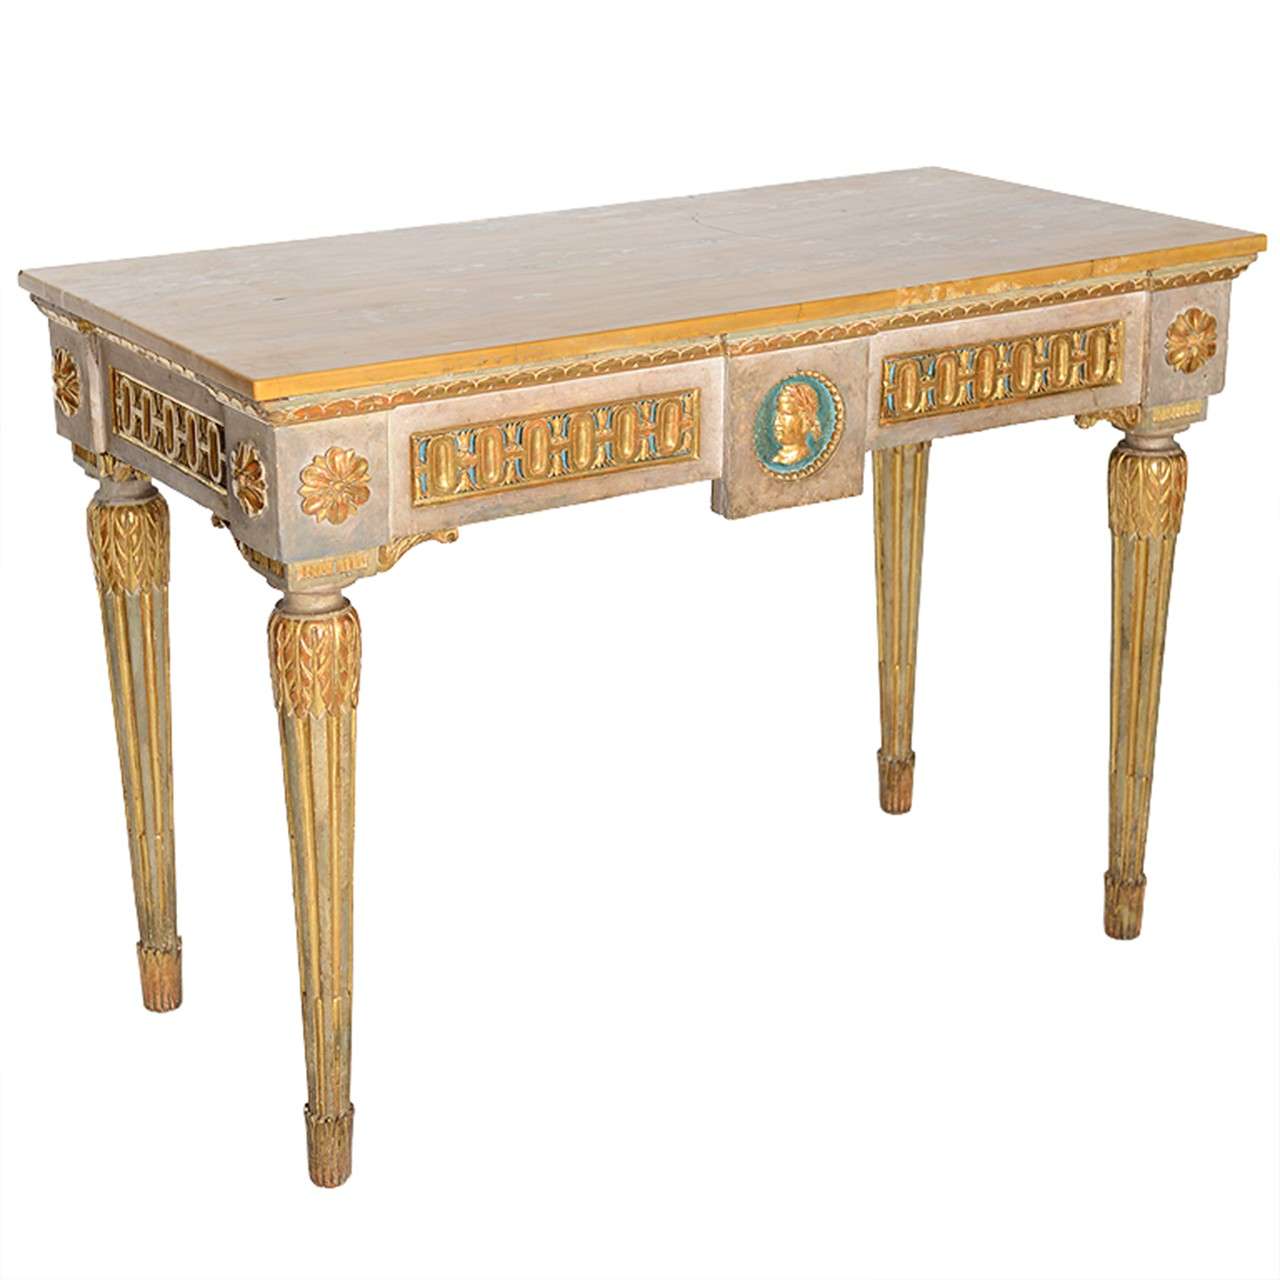 Fine Italian Neoclassic Painted and Parcel-Gilt Console, Roman Late 18th Century